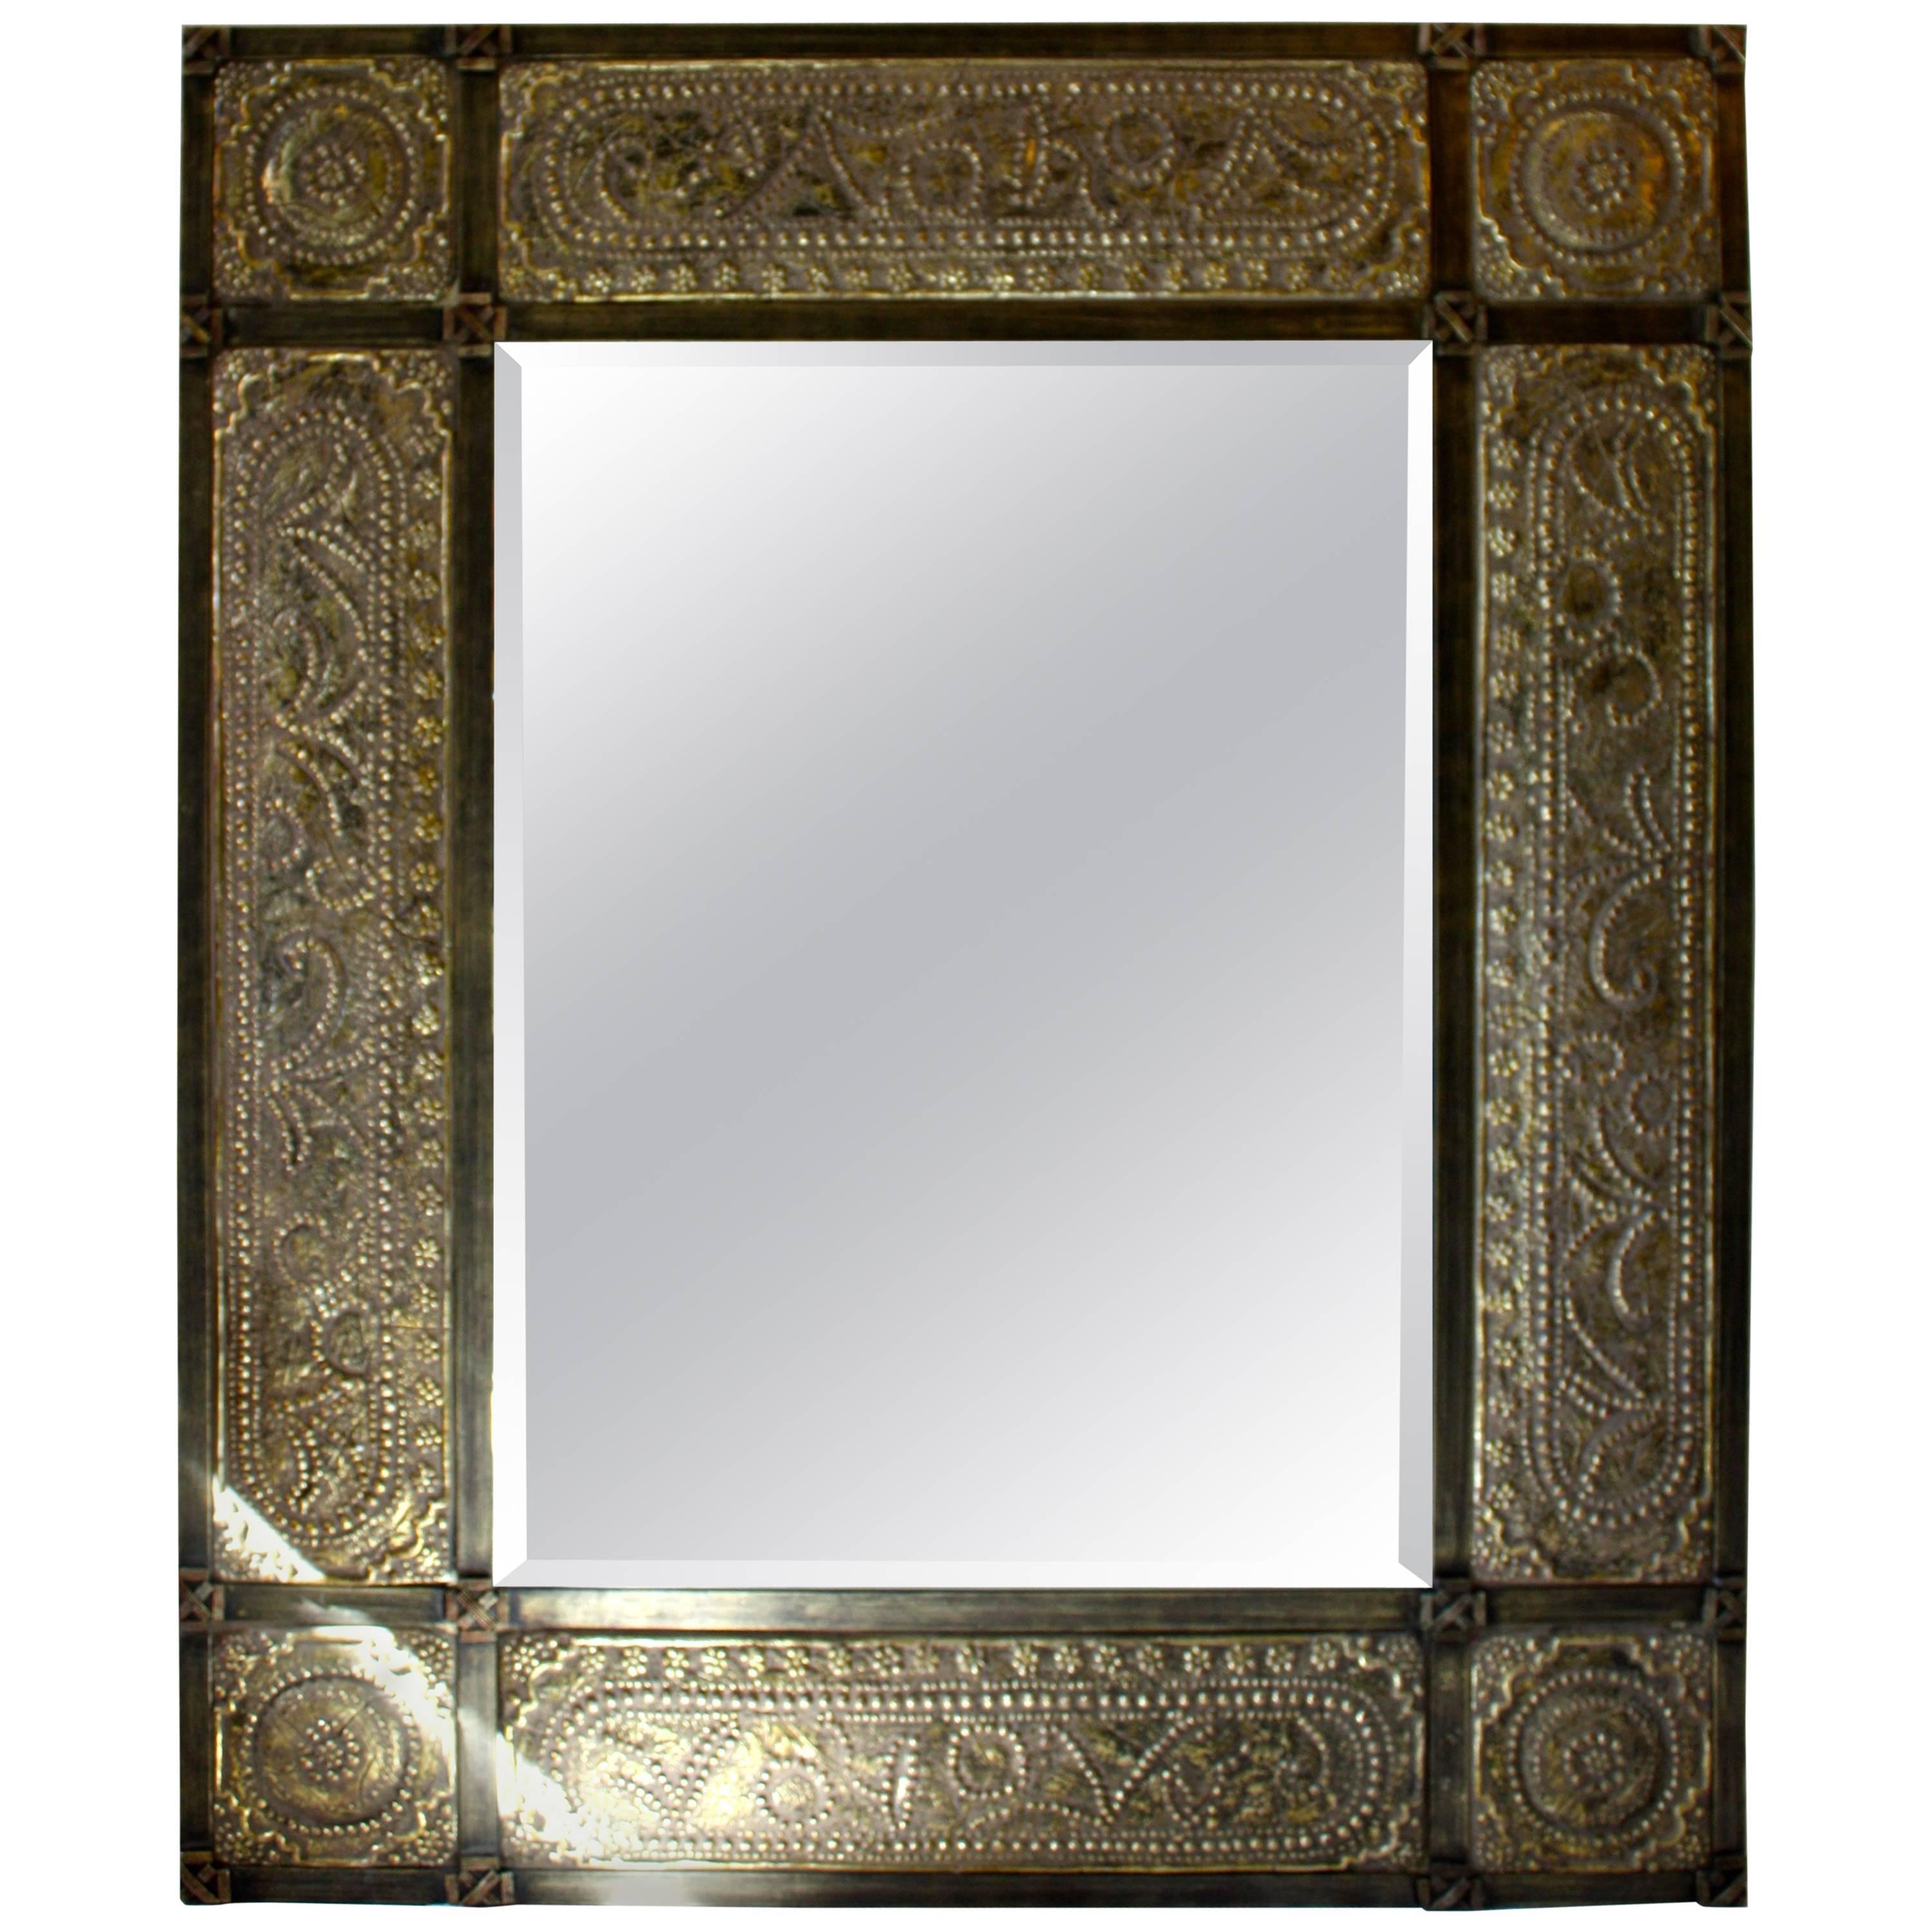 Moroccan Styled Mirror For Sale